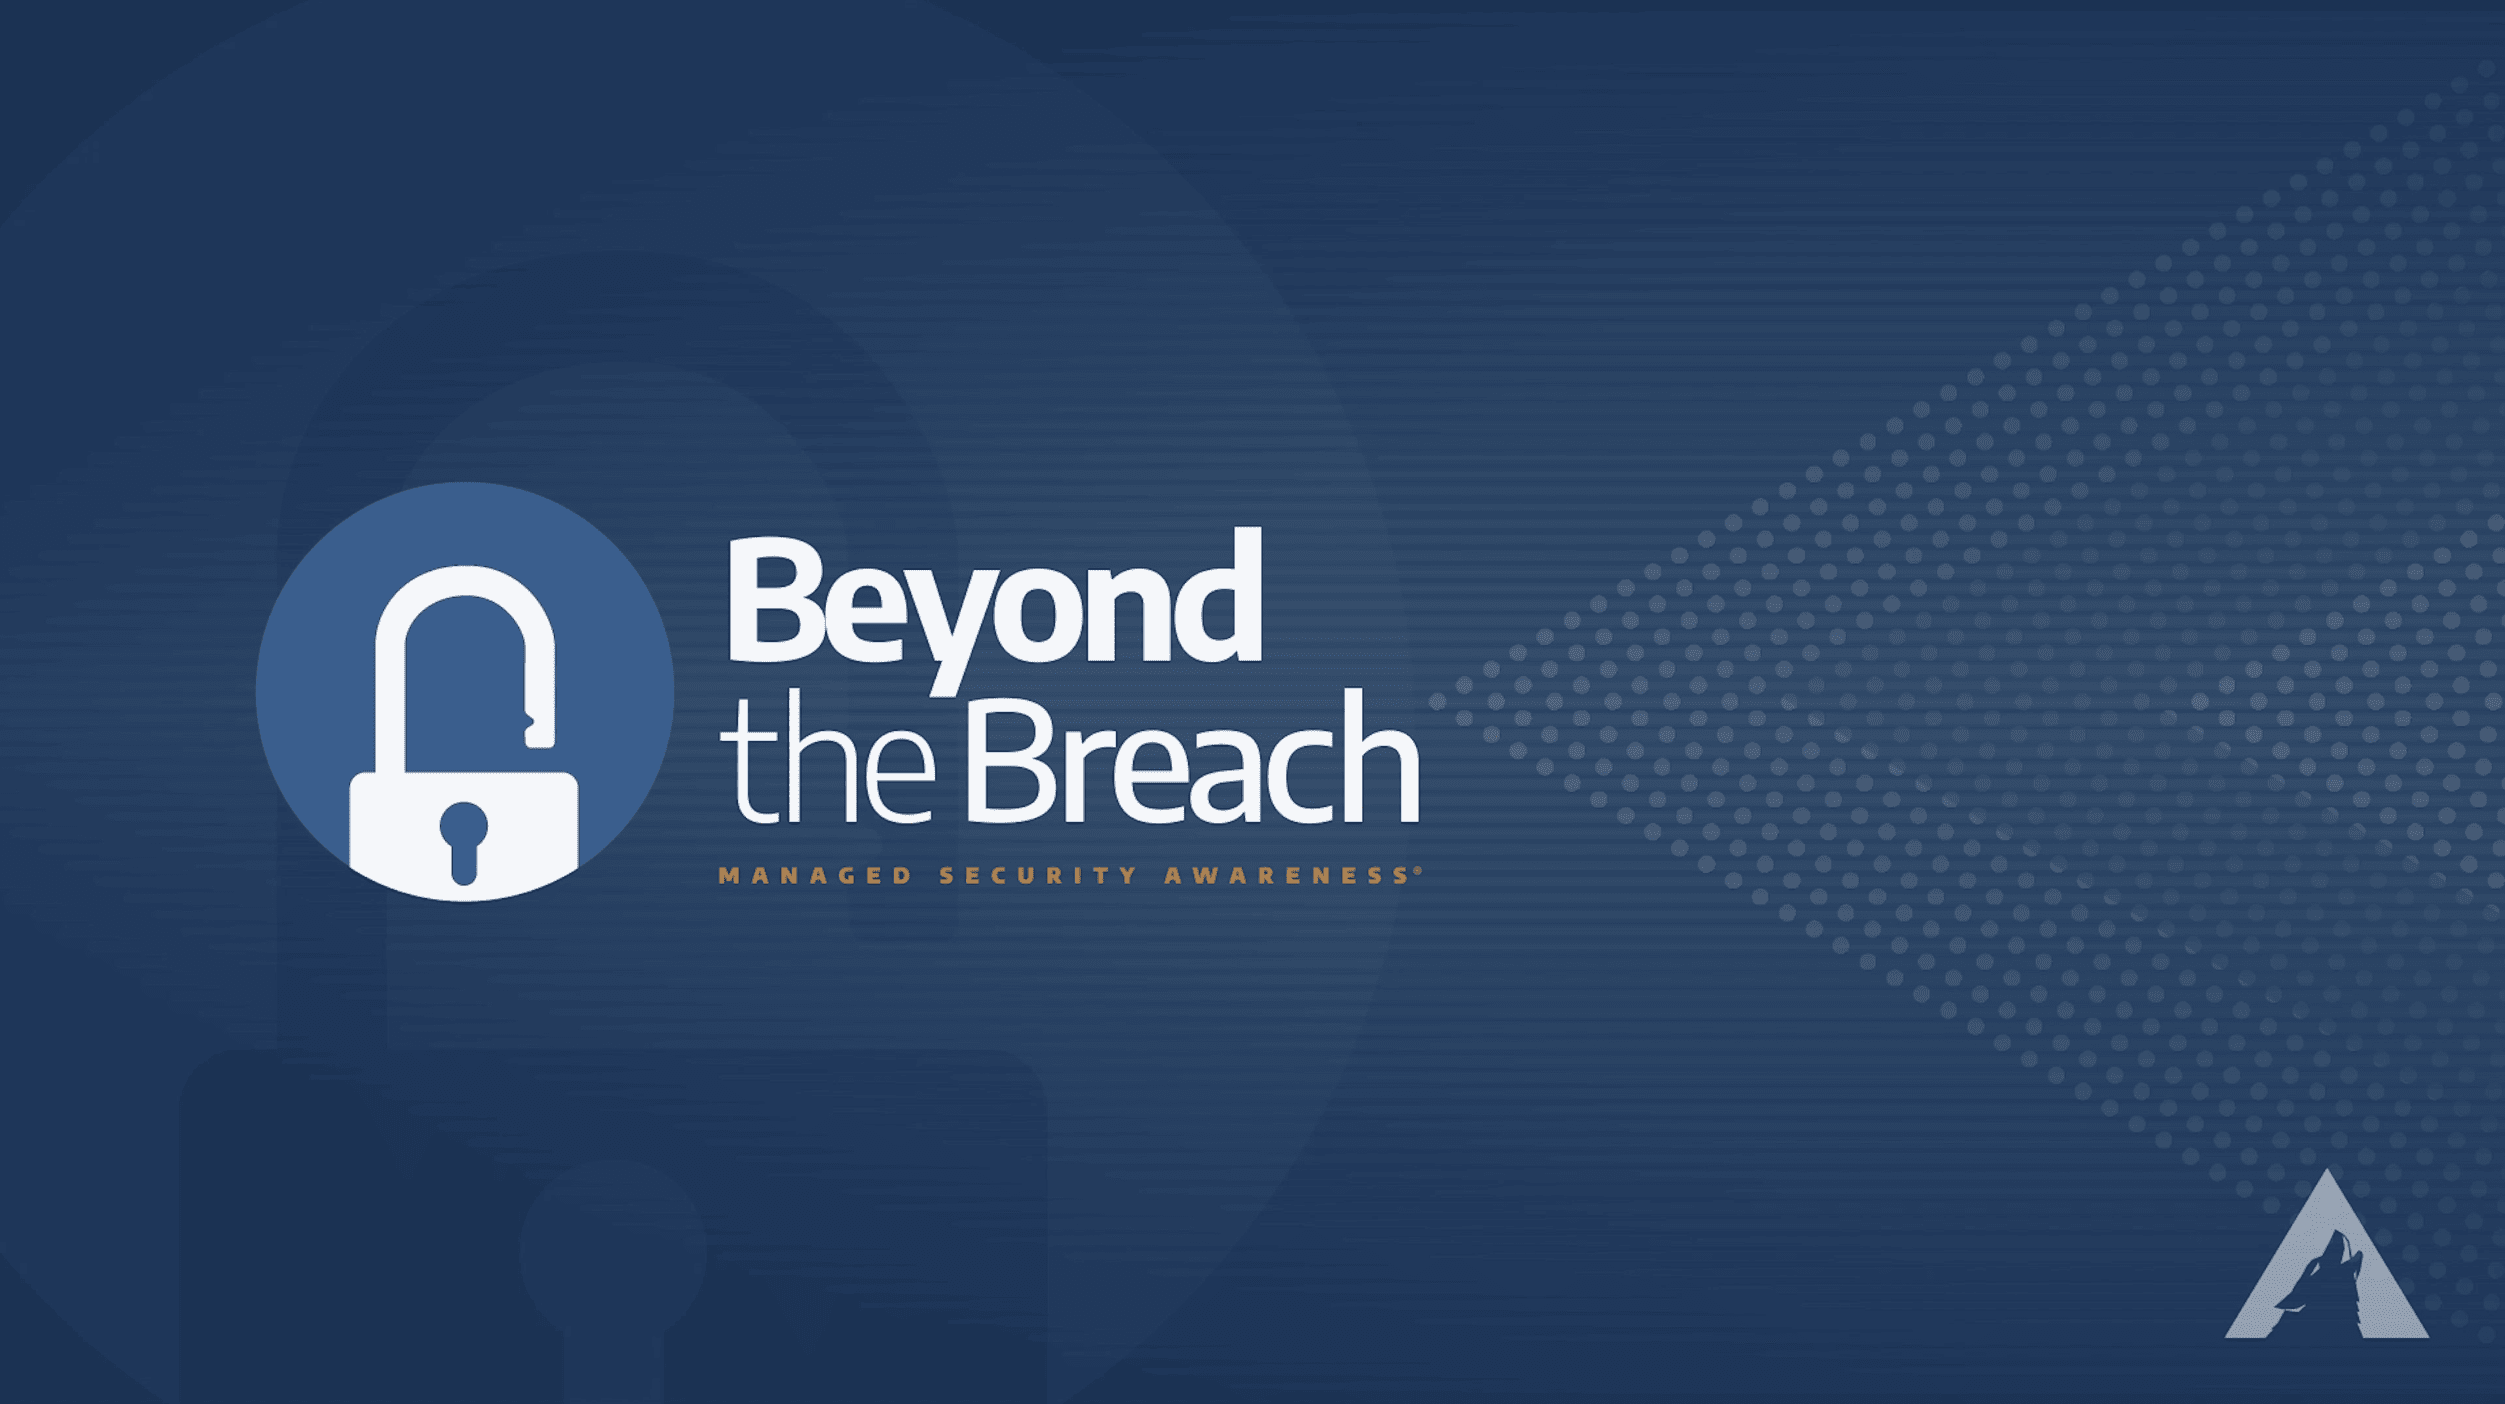 Beyond the Breach with a lock icon.